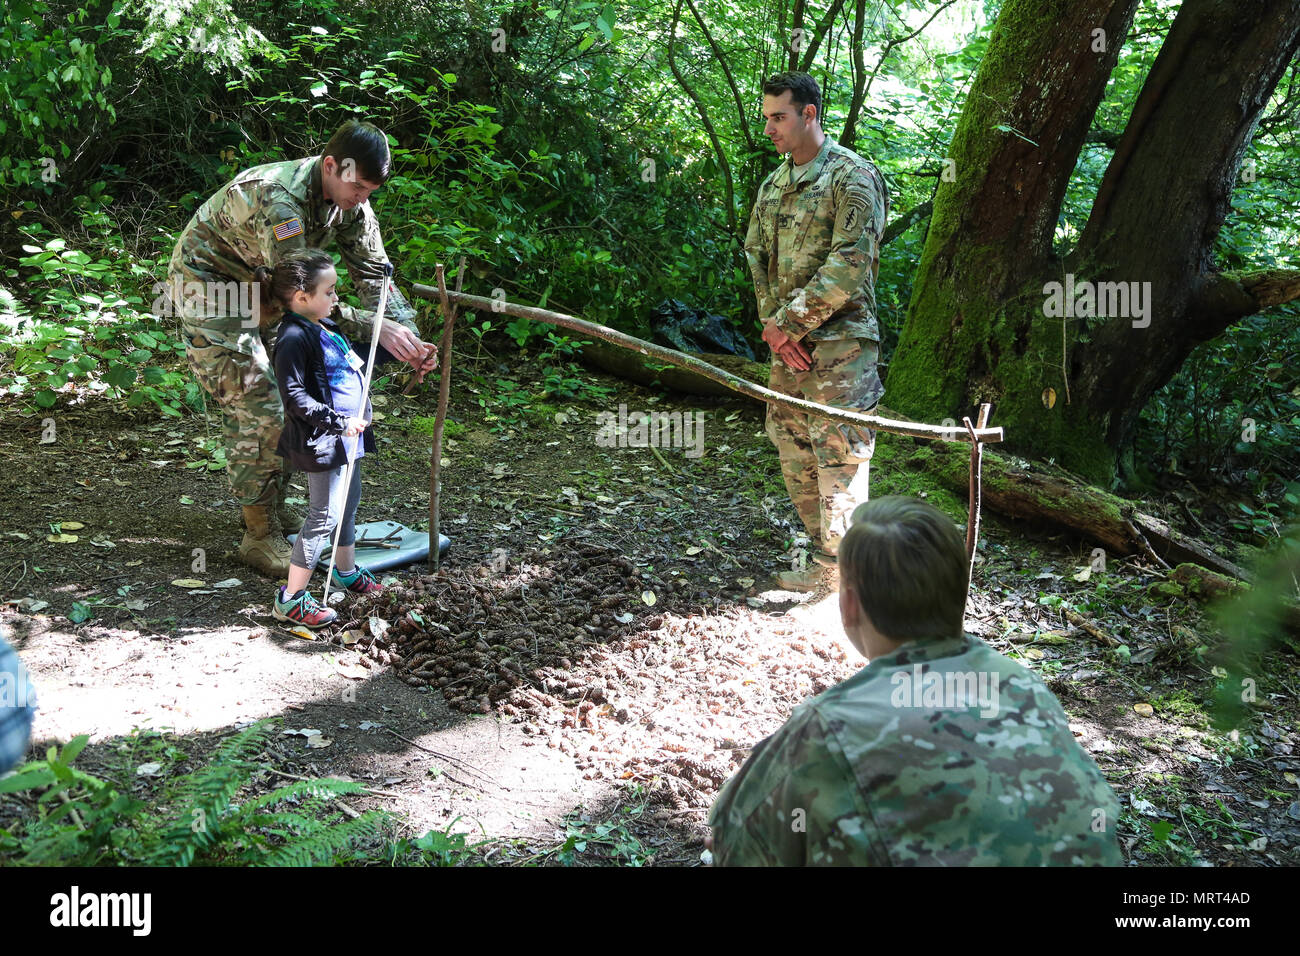 Green Berets assigned to 1st Special Forces Group (Airborne) teach children from Saint Jude’s Children's Hospital survival skills on June 30th at Vashon Island, WA. The Soldiers showed the children how to survive in the wilderness by teaching them how to build shelters, start fires, and administer first aid. Stock Photo